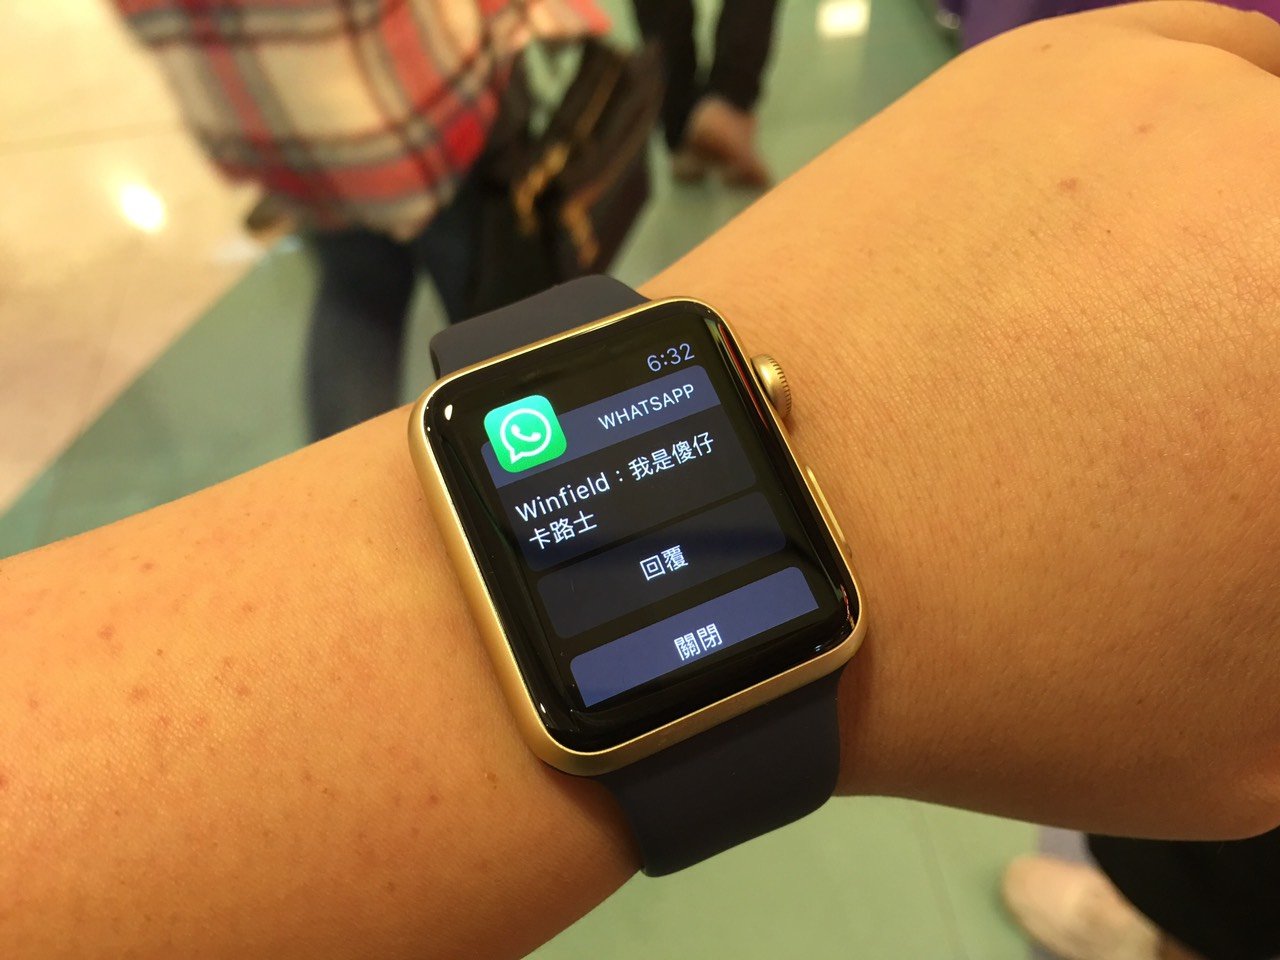 Can you see whatsapp messages on apple watch